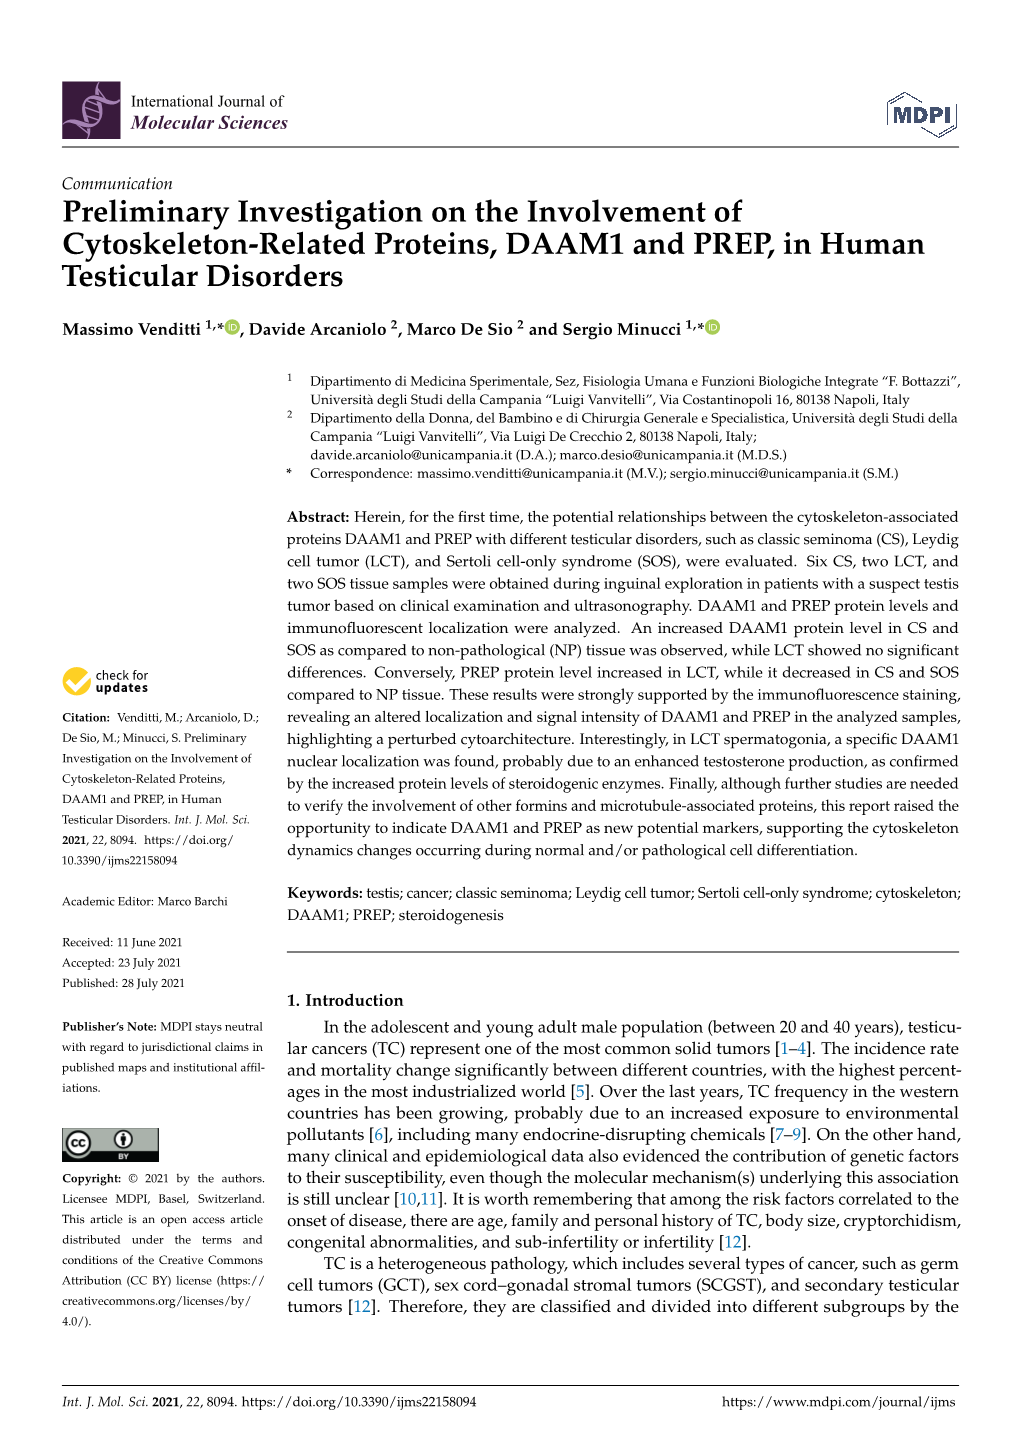 Preliminary Investigation on the Involvement of Cytoskeleton-Related Proteins, DAAM1 and PREP, in Human Testicular Disorders